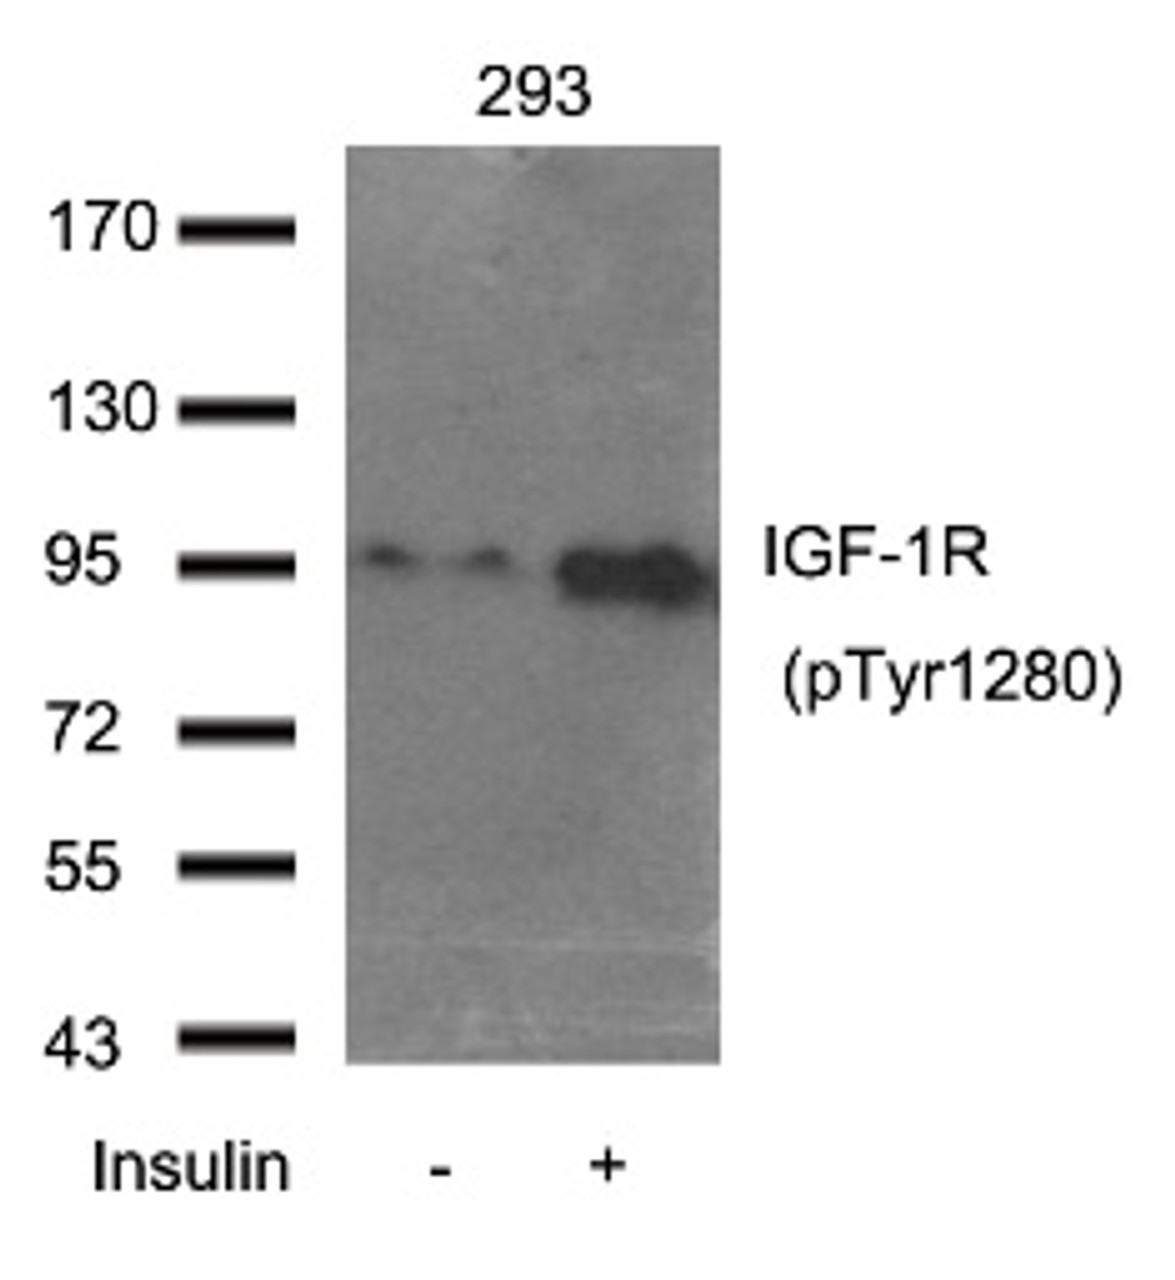 Western blot analysis of extract from 293 cells using IGF-1R (Phospho-Tyr1280) .